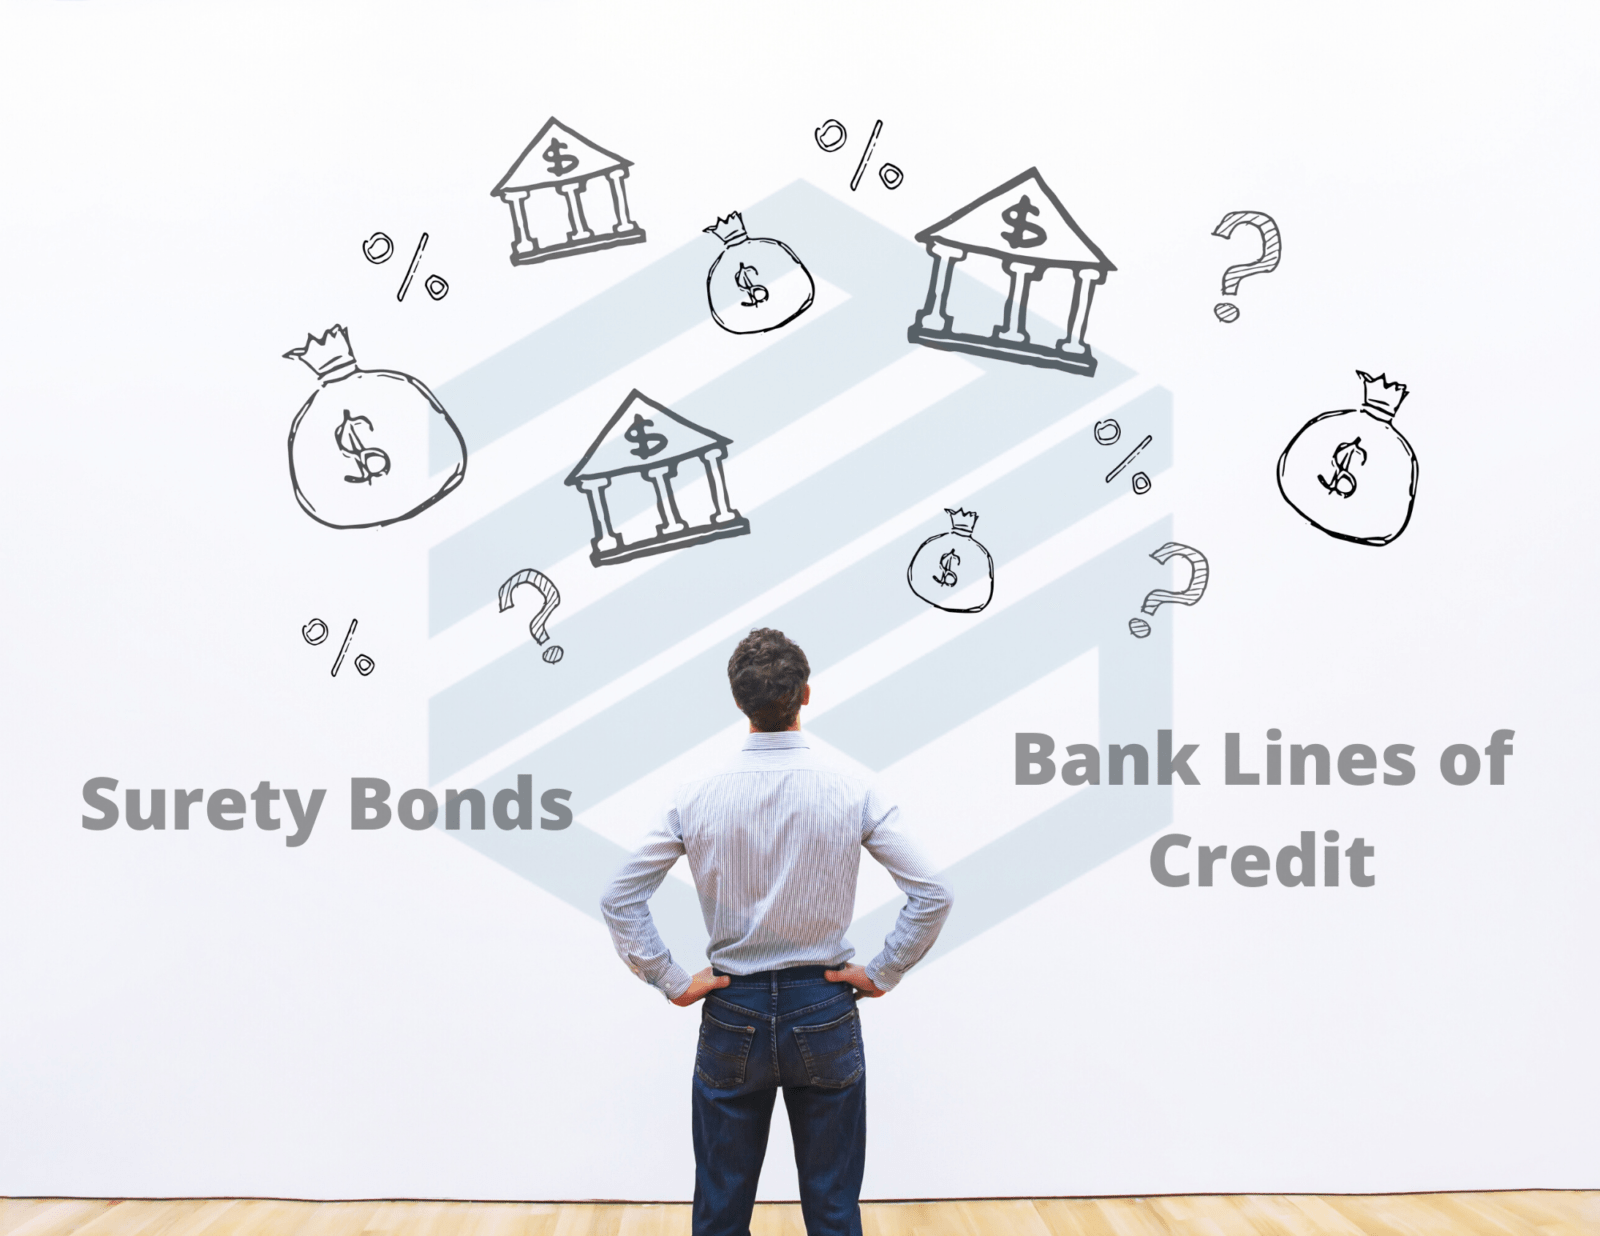 Surety Bonds and Bank Lines of Credit - Man looking at a white board with banks, dollars signs and the words "Surety Bond" and "Bank Lines of Credit"